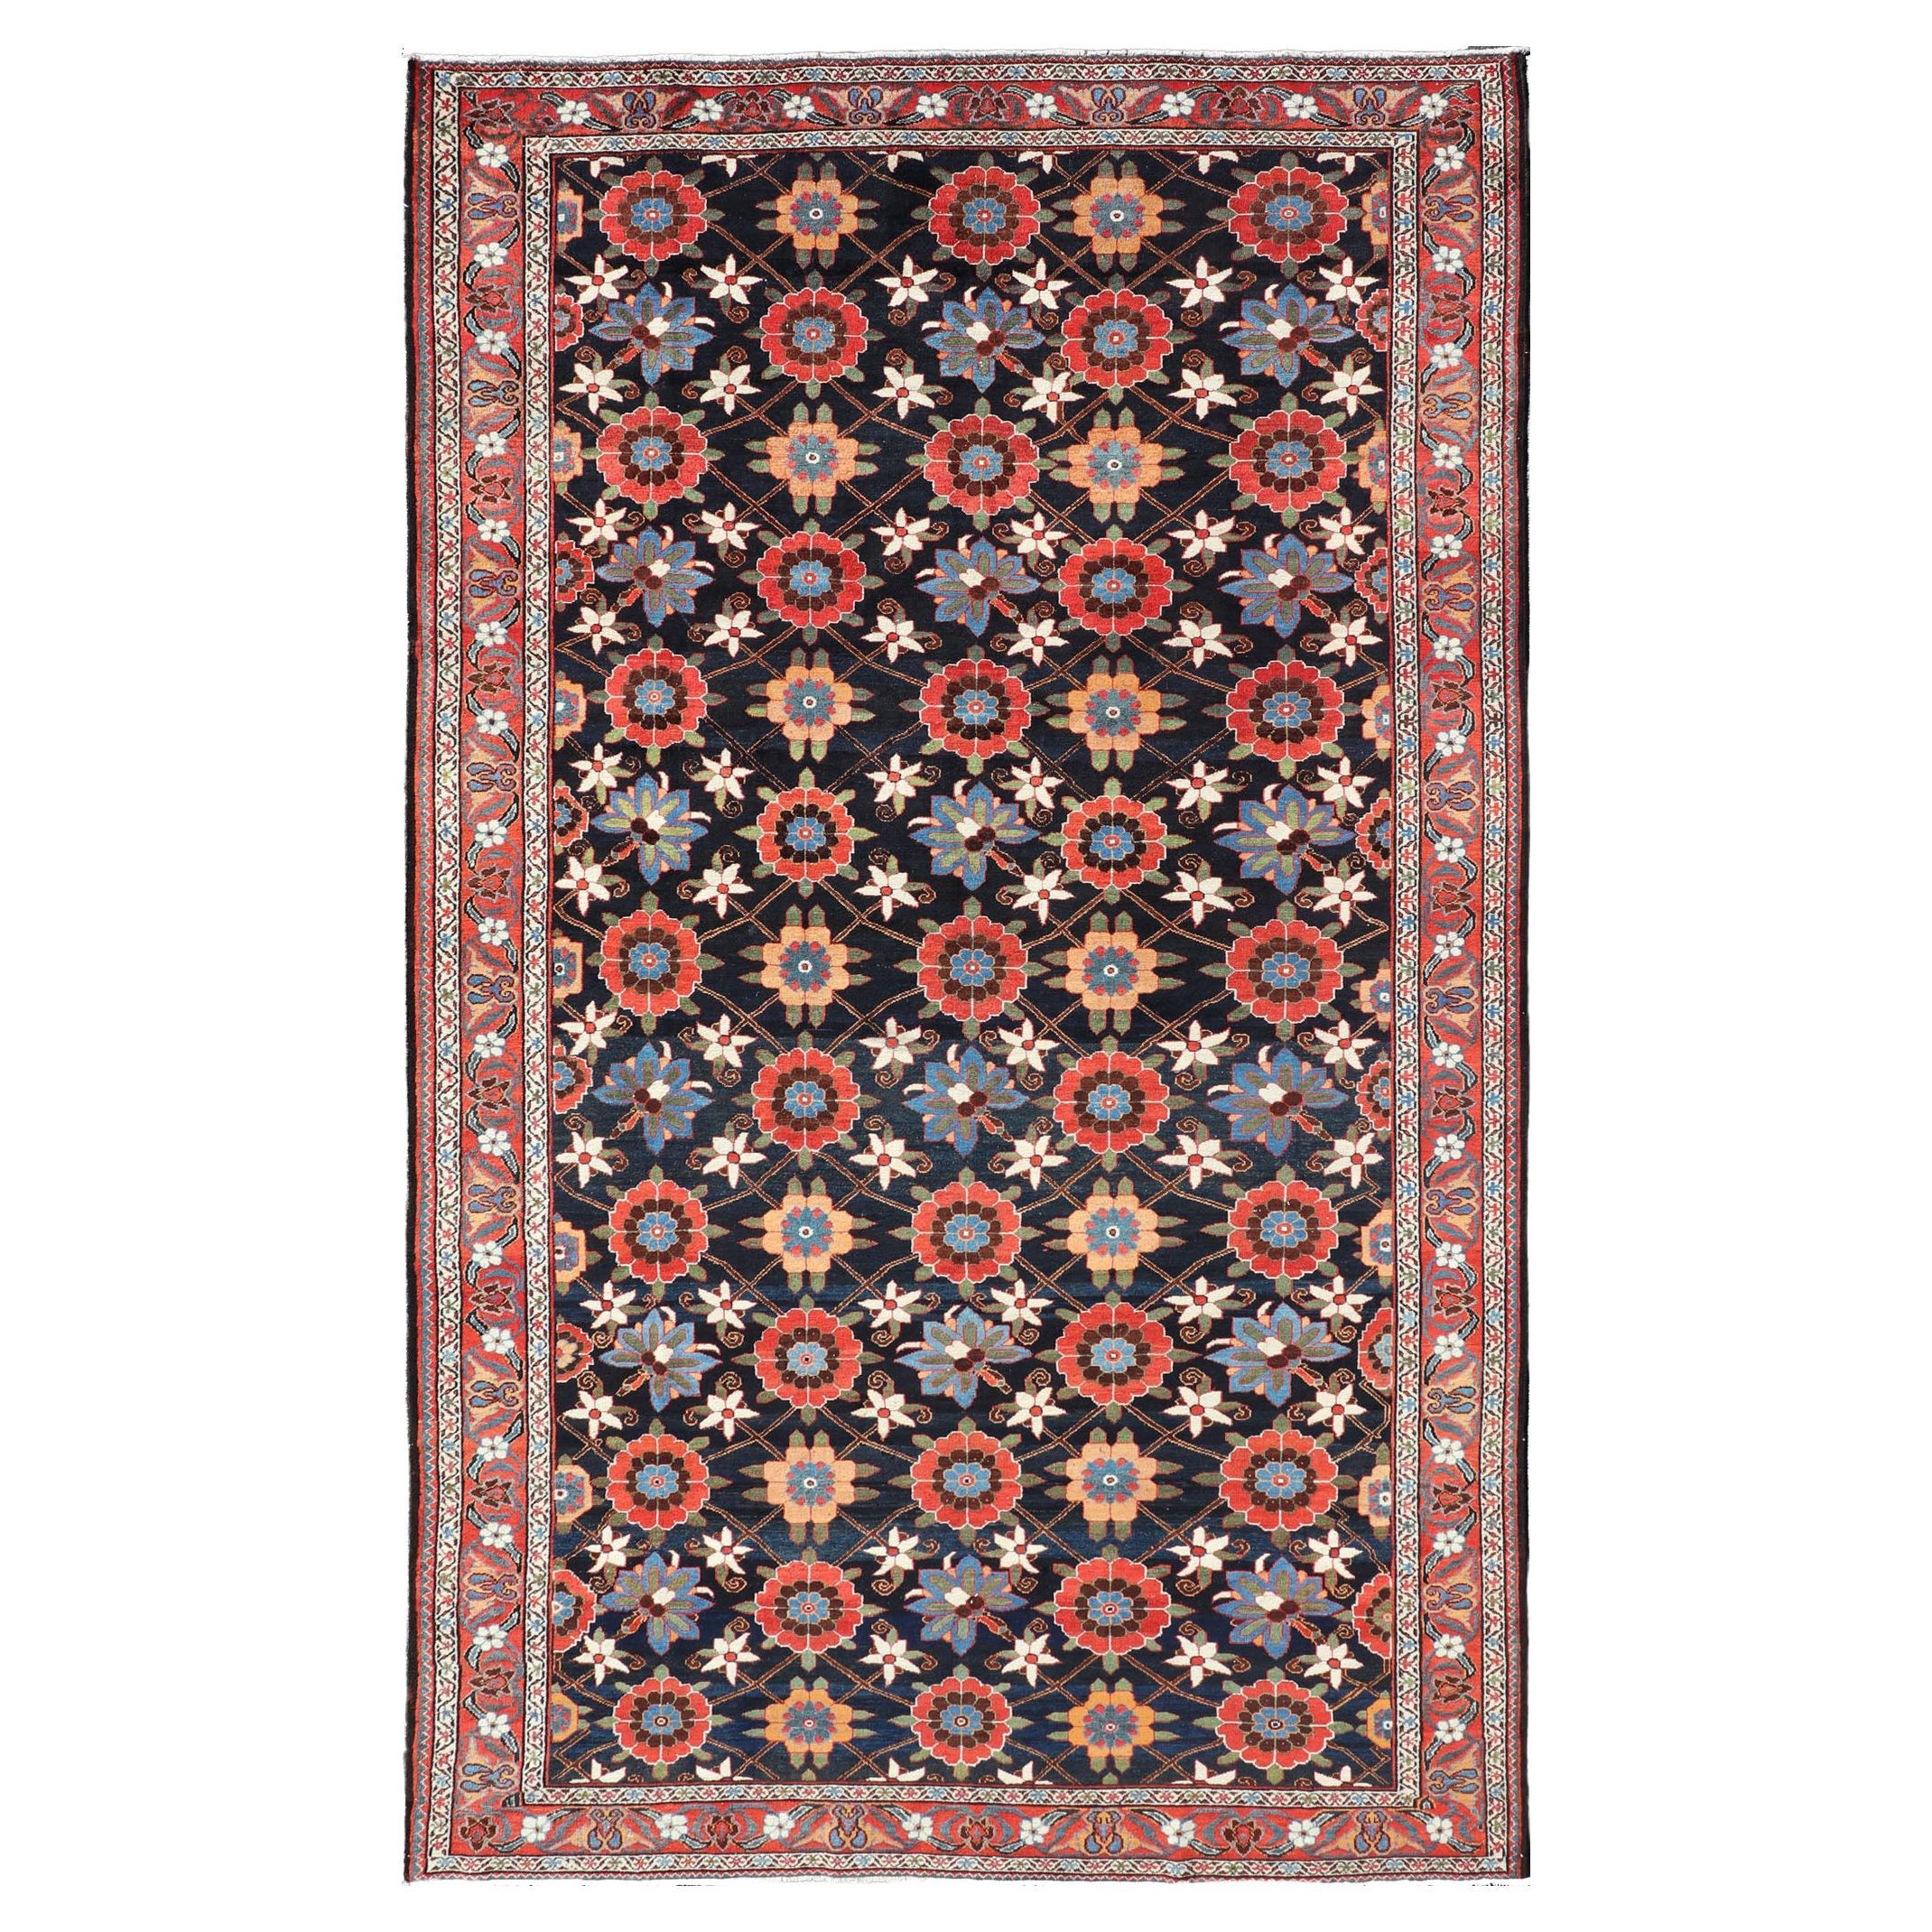 Wool Handknotted Antique Persian Gallery Bakhitari Rug in All-Over Floral Design